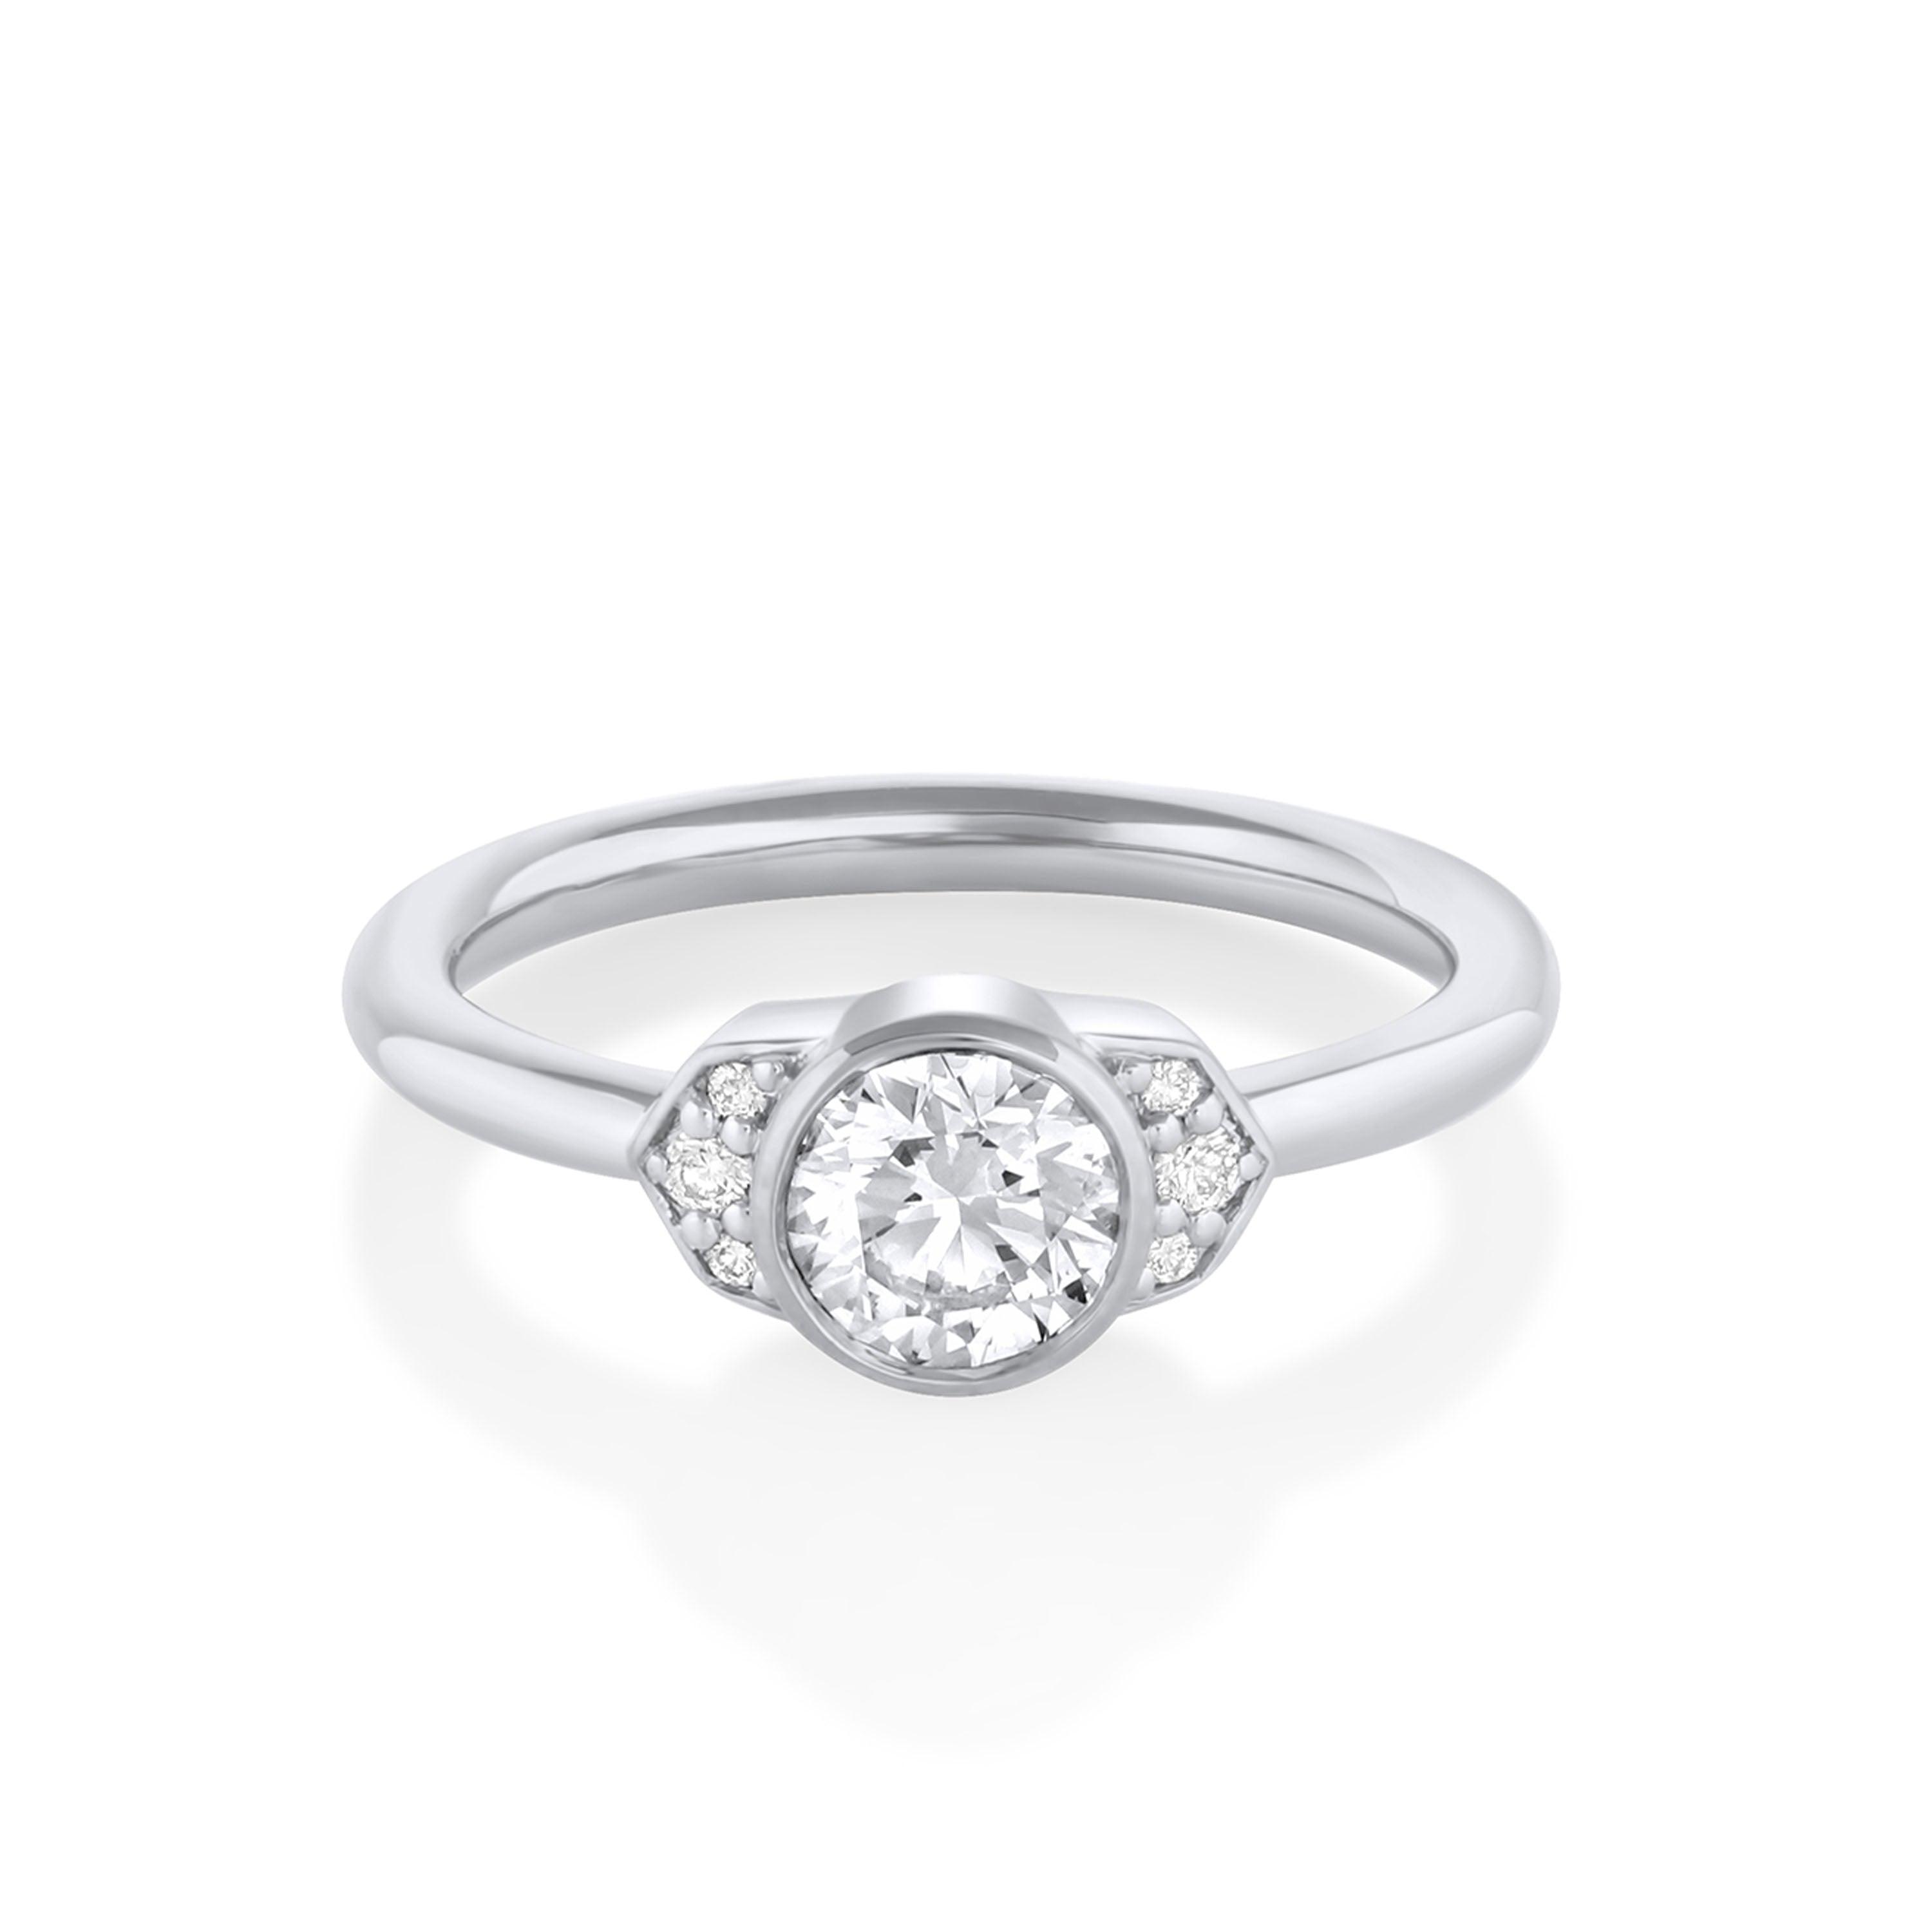 Marrow Fine Jewelry Minuette Collection Josephine Cadillac White Diamond Engagement Ring